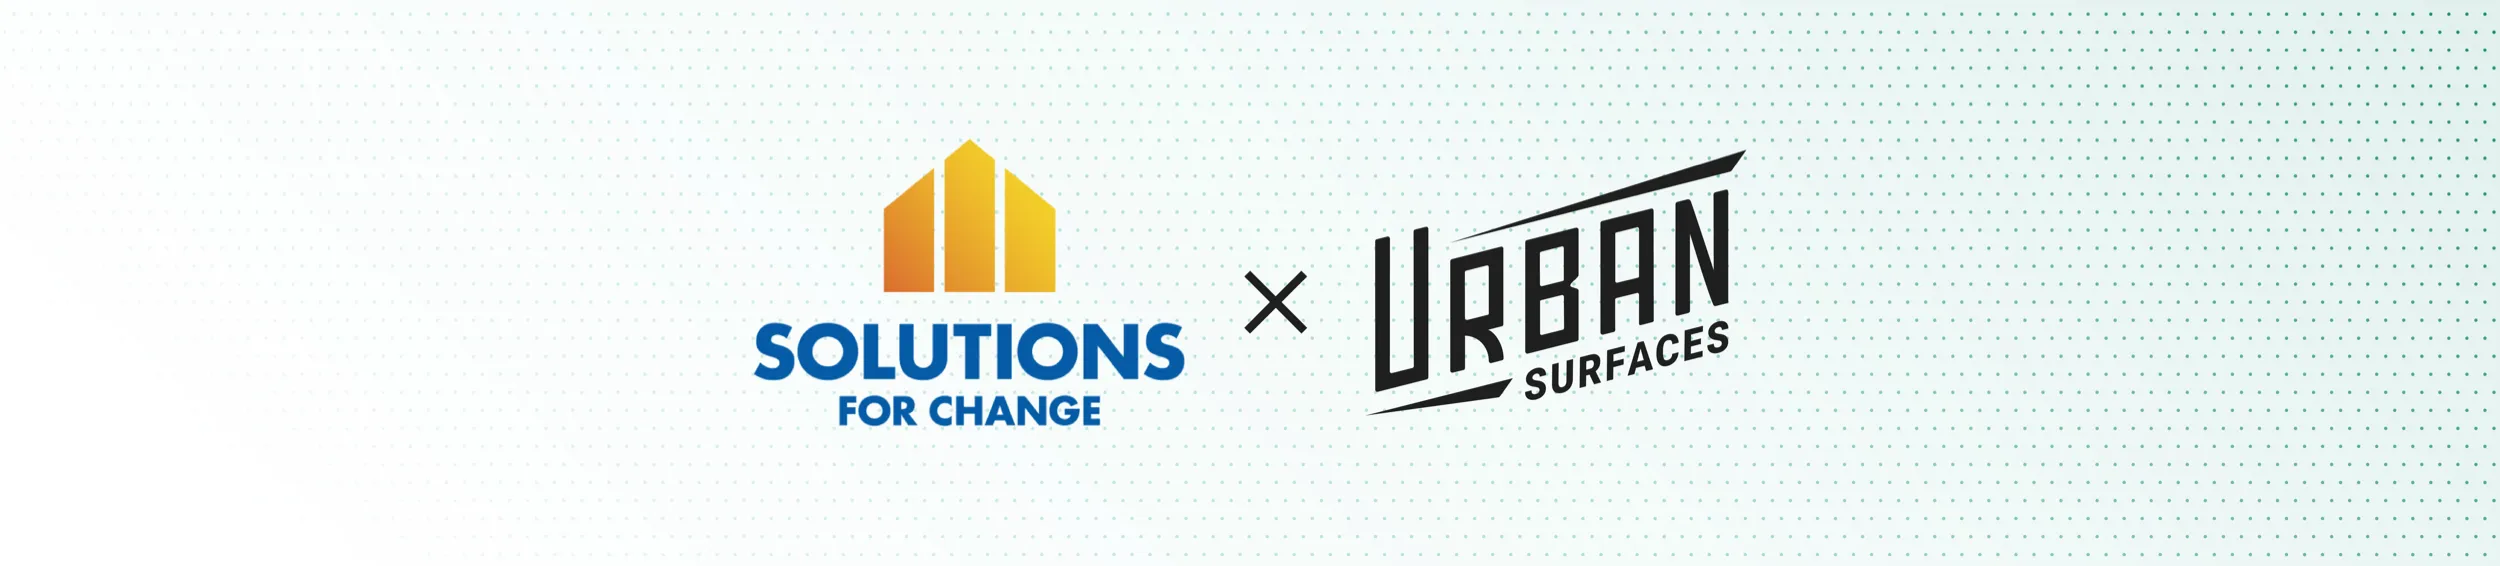 Solutions for Change logo and Urban Surfaces logo.